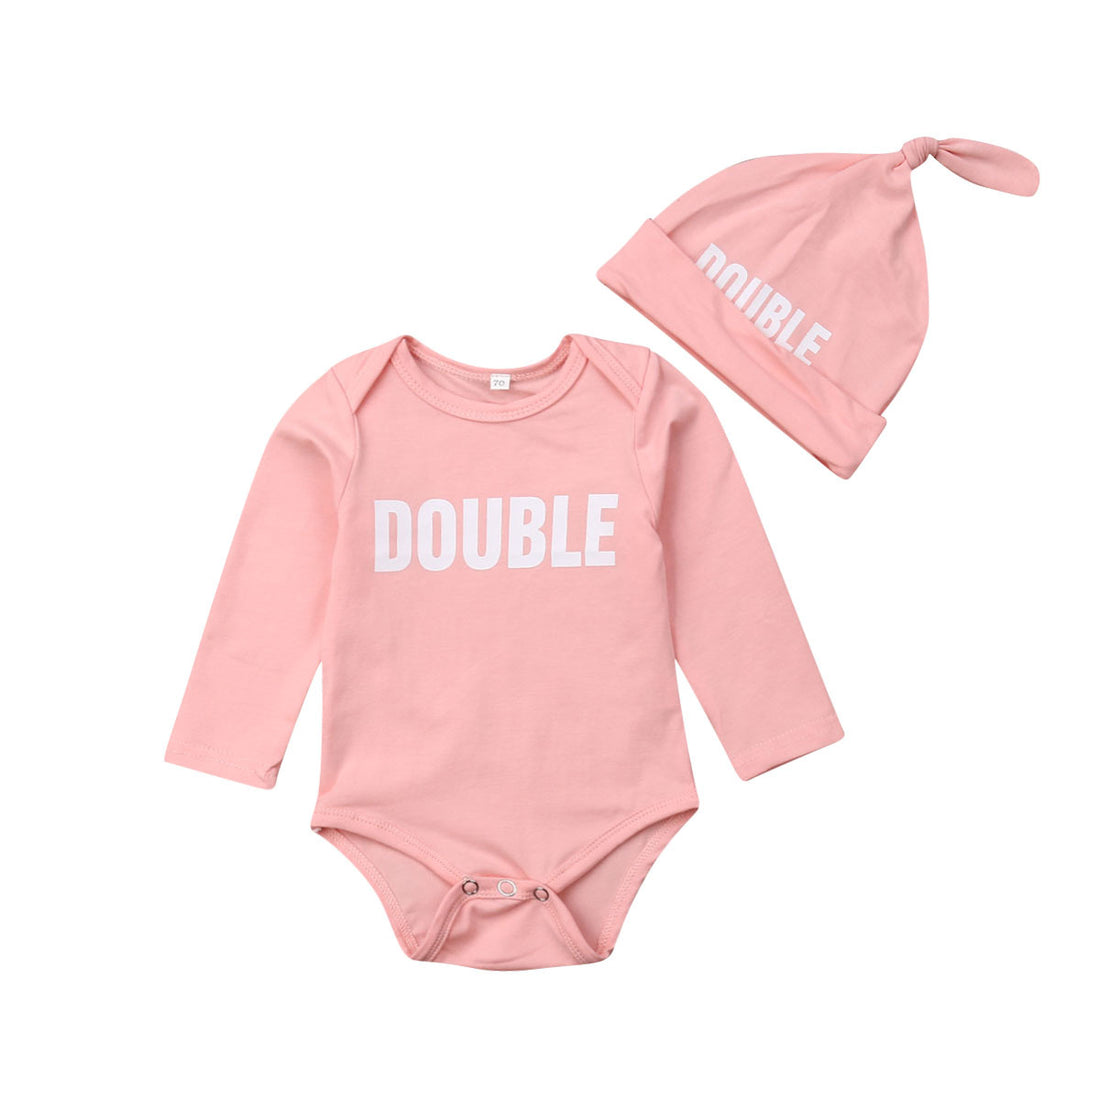 New autumn baby clothes